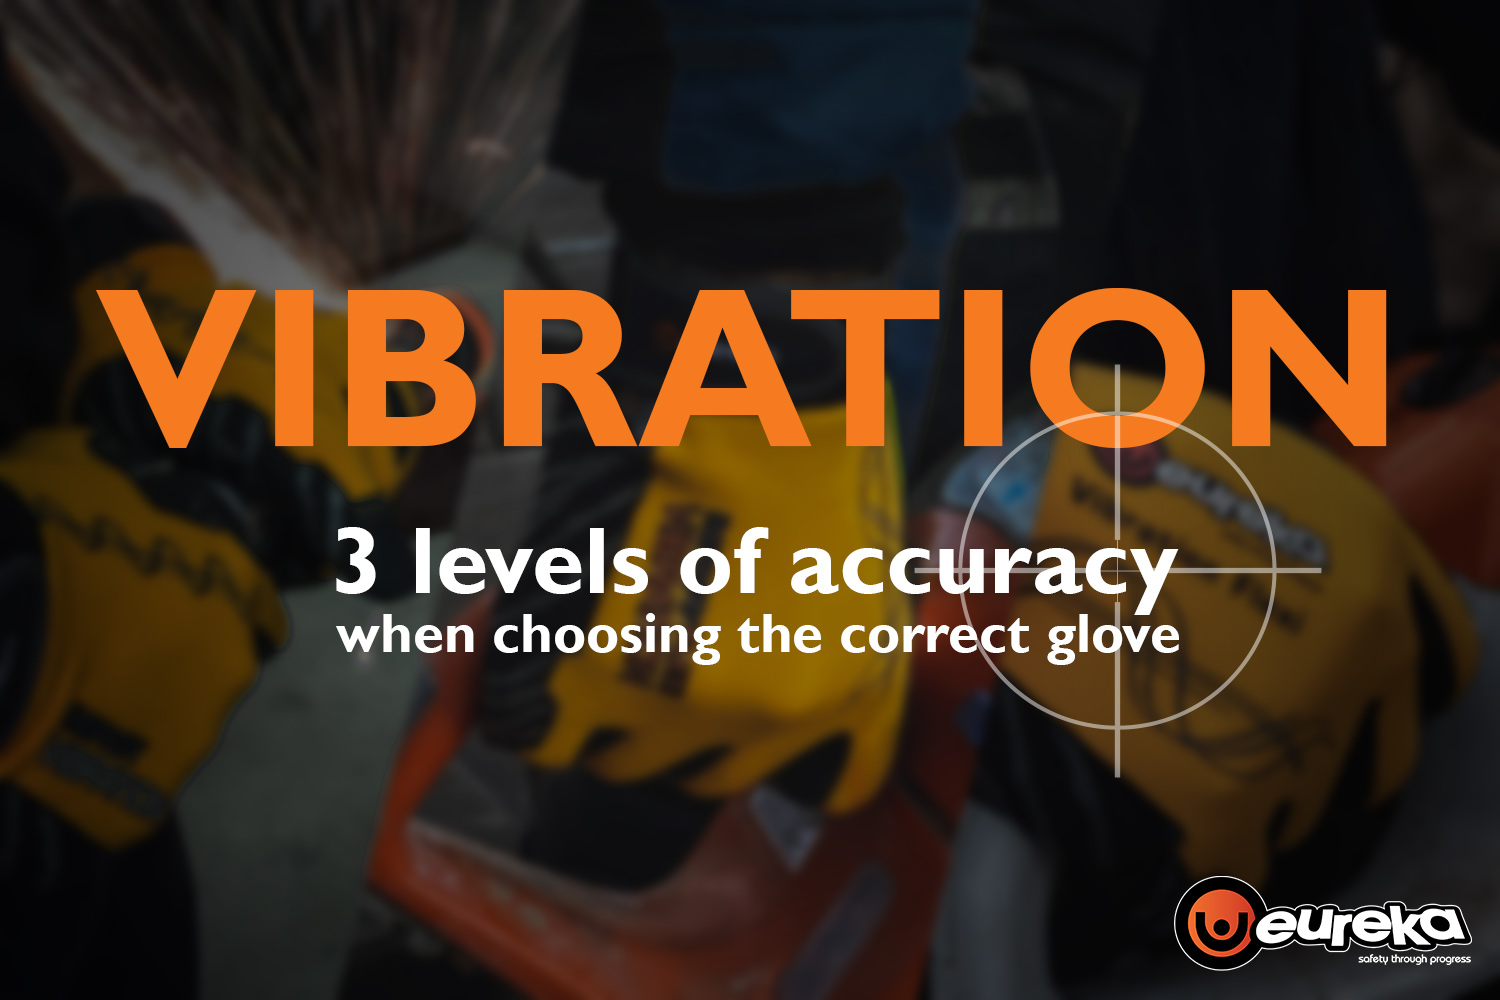 Vibration 3 levels of accuracy